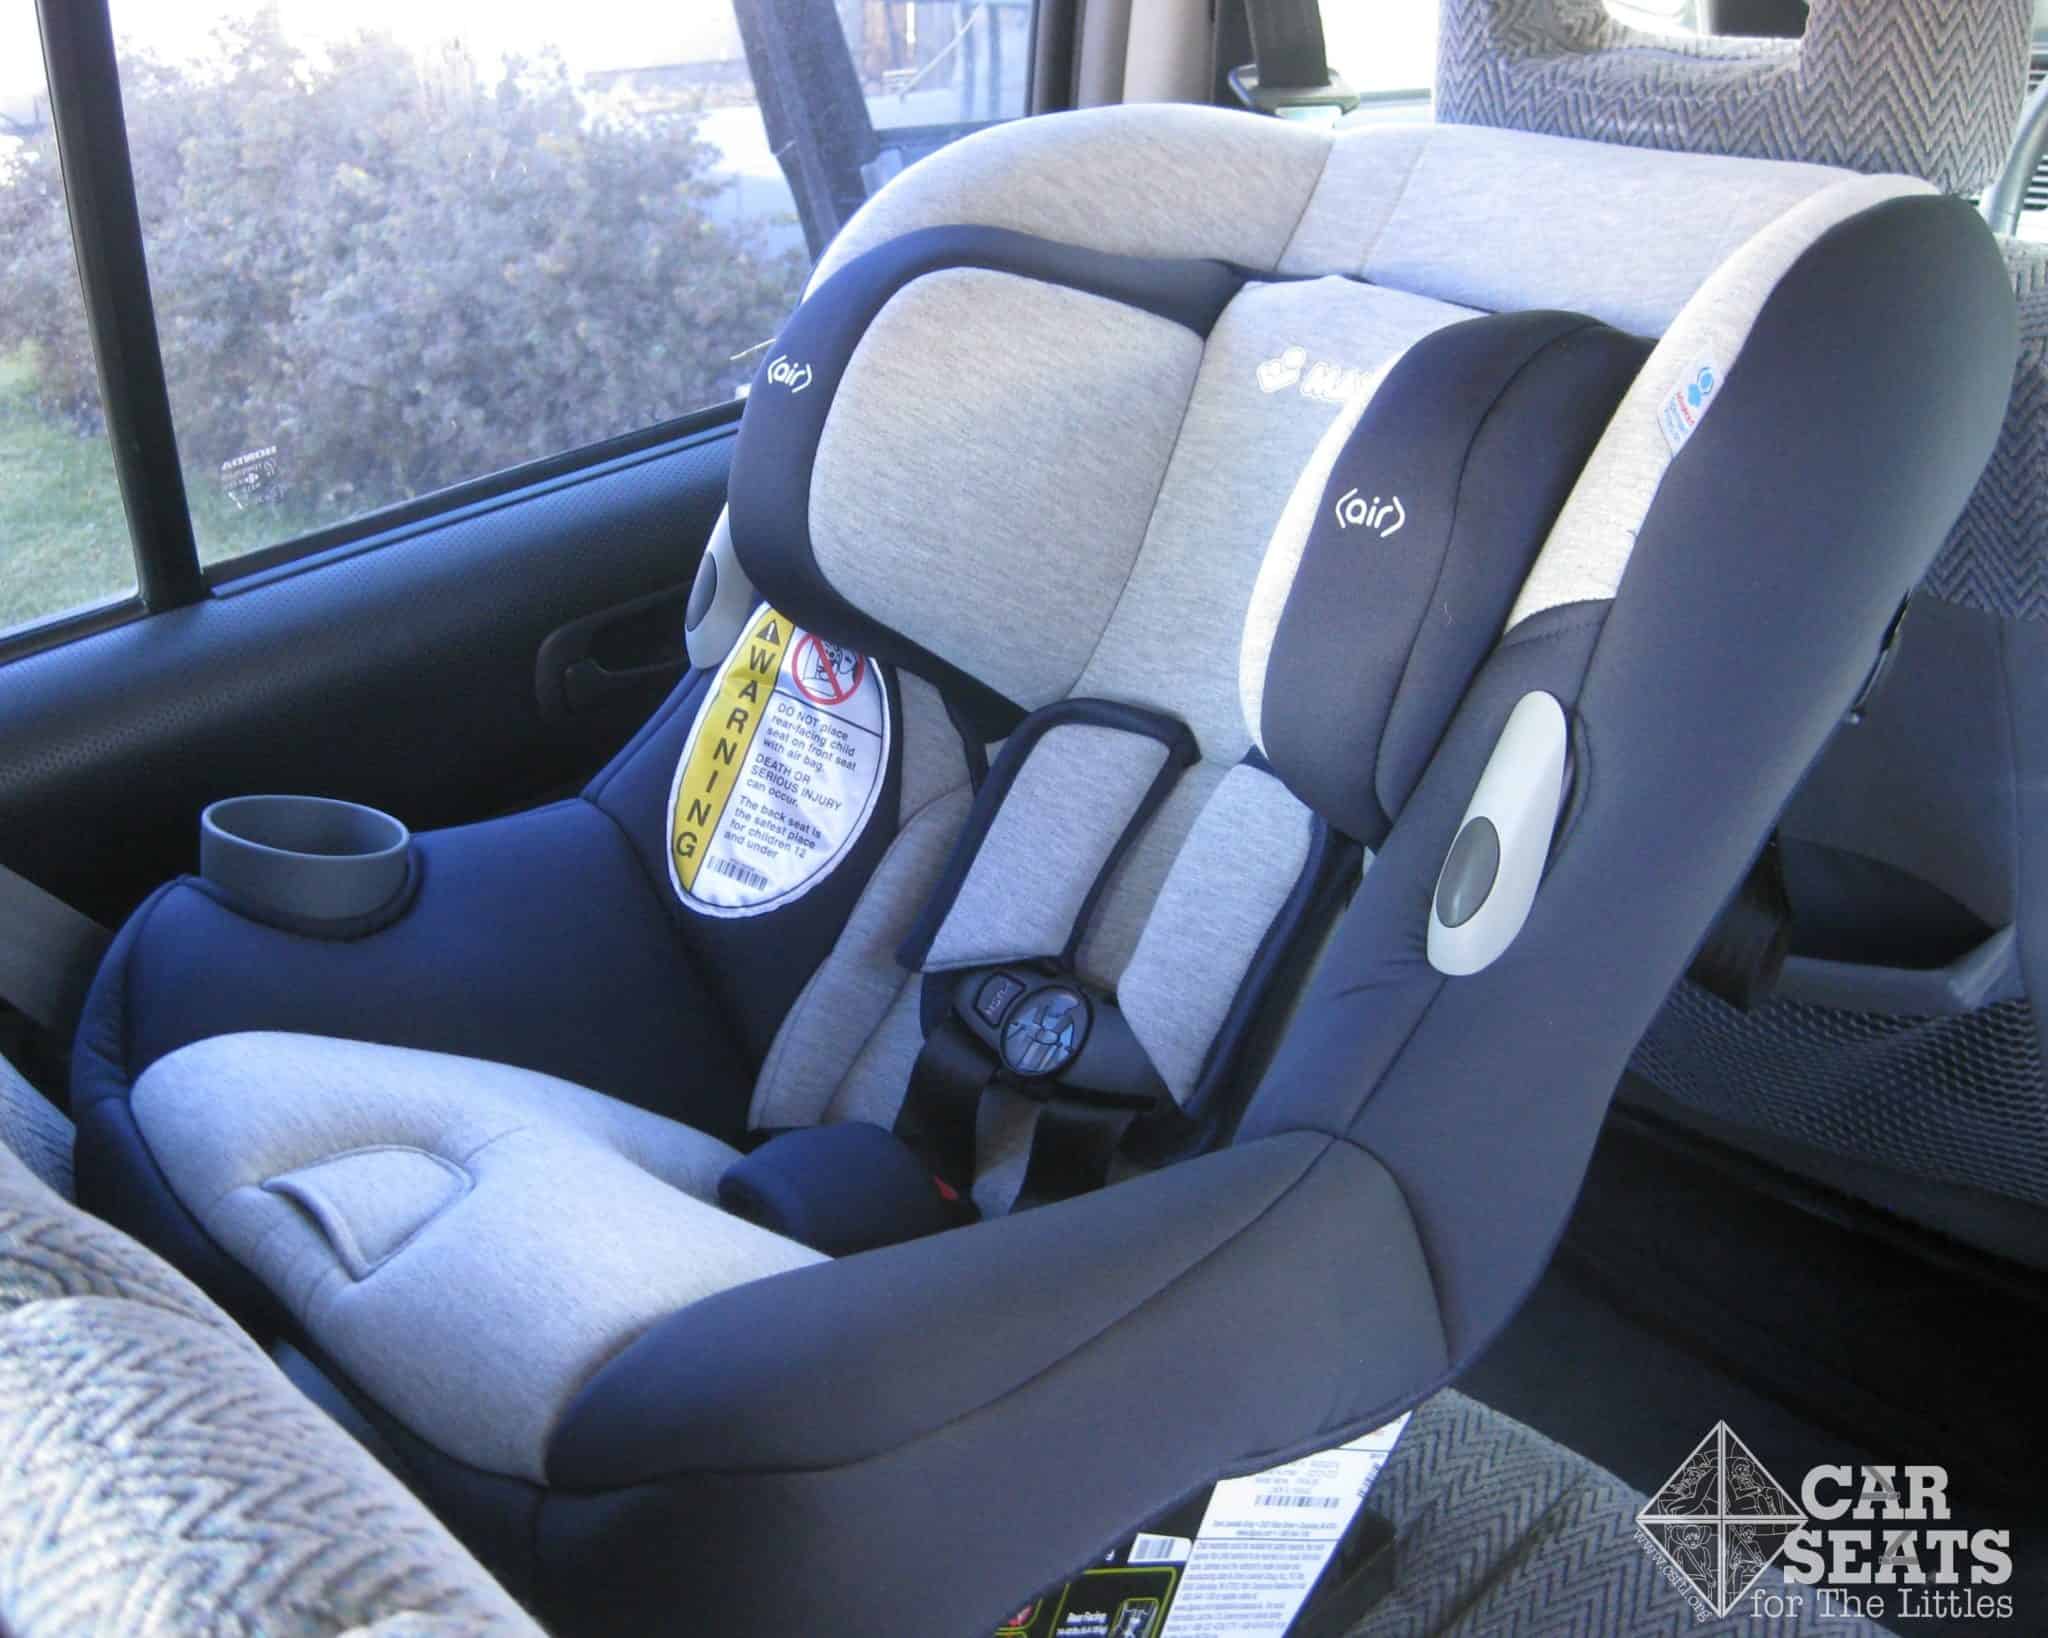 MaxiCosi Pria 85 Review Car Seats For The Littles